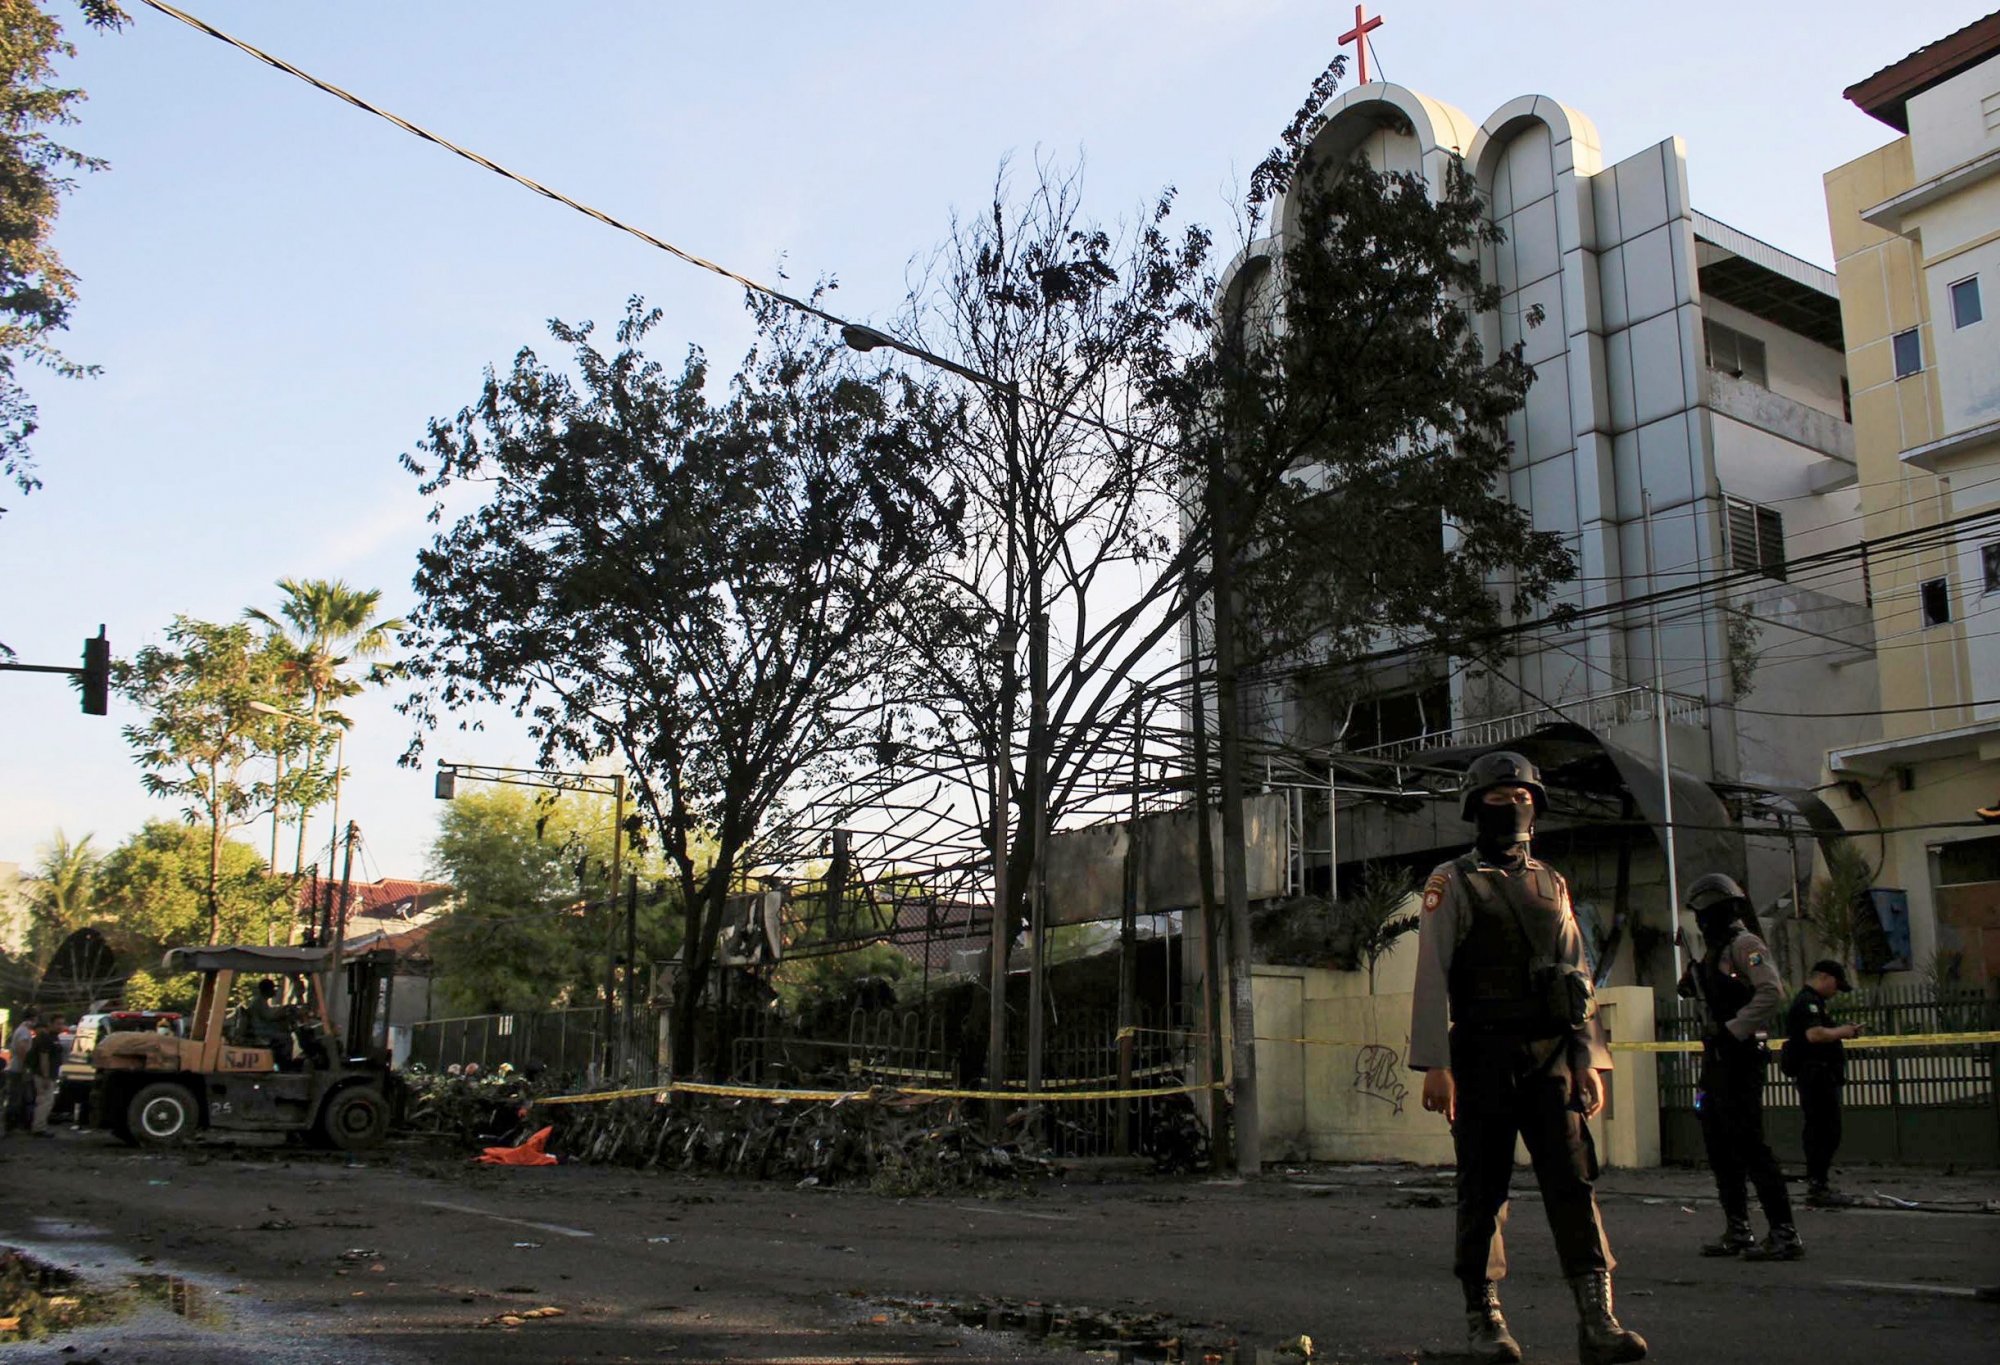 epa06732578 Indonesian police officers stand guard at the site of a bomb blast in front of a church in Surabaya, East Java, Indonesia, 13 May 2018. According to media reports, at least eleven people have been killed and dozens of others were injured after bomb blasts occurred at three locations in Surabaya.  EPA/STRINGER INDONESIA BOMB BLAST